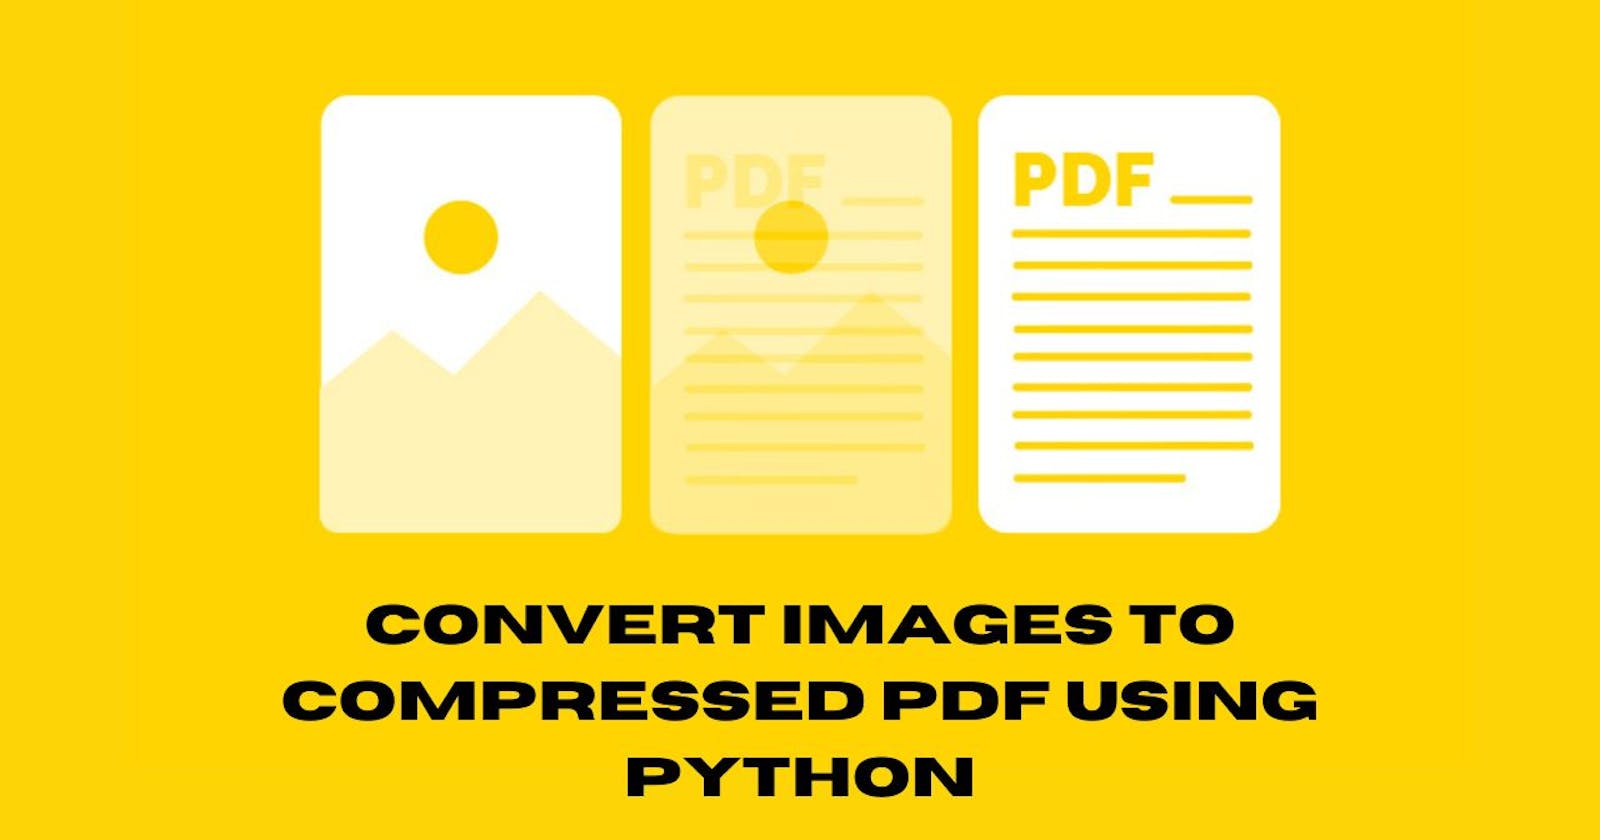 How to make a Python script to convert images to PDF